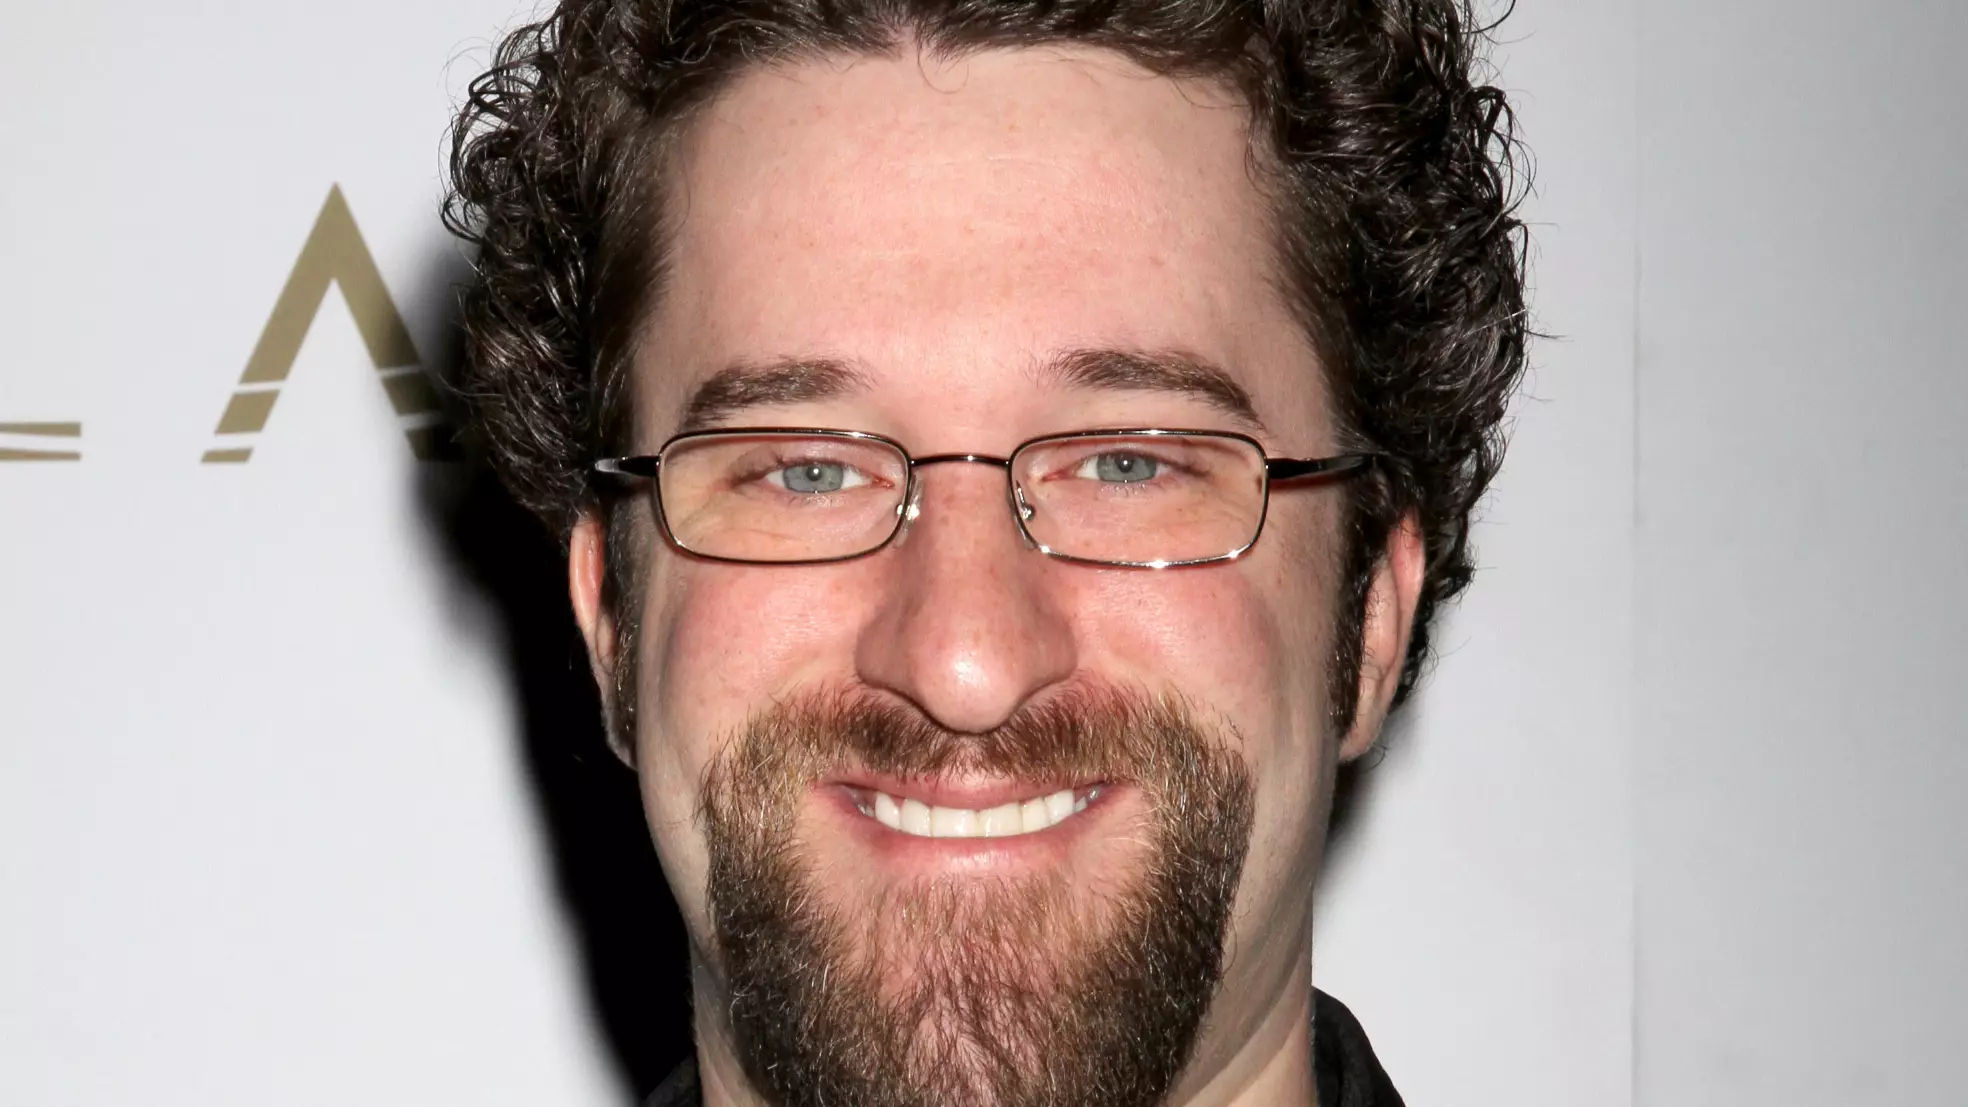 Saved By The Bell's Dustin Diamond Diagnosed With Stage 4 Cancer